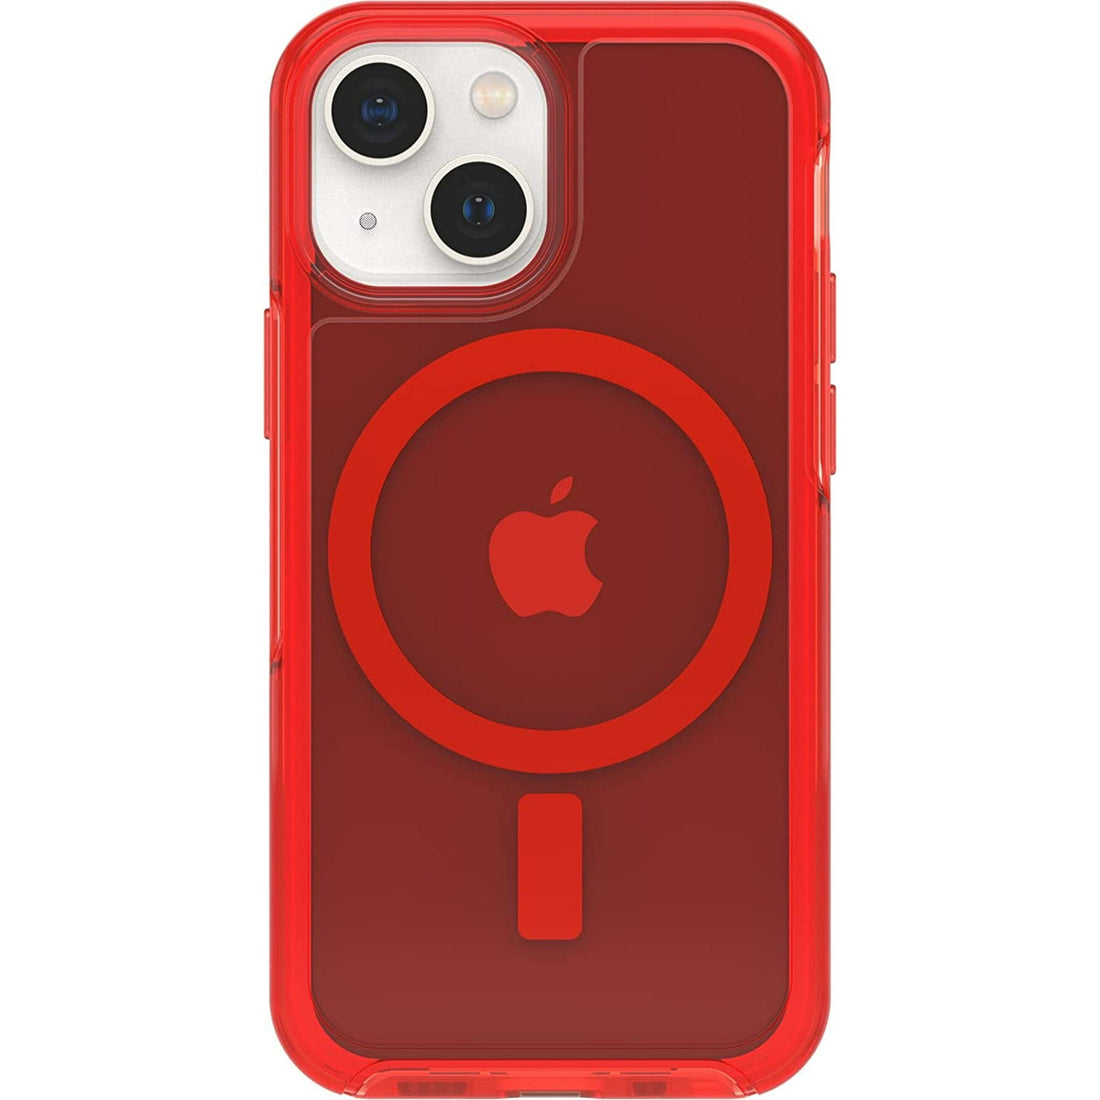 OtterBox SYMMETRY SERIES+ Case for Apple iPhone 13 mini/12 mini - In The Red (Certified Refurbished)